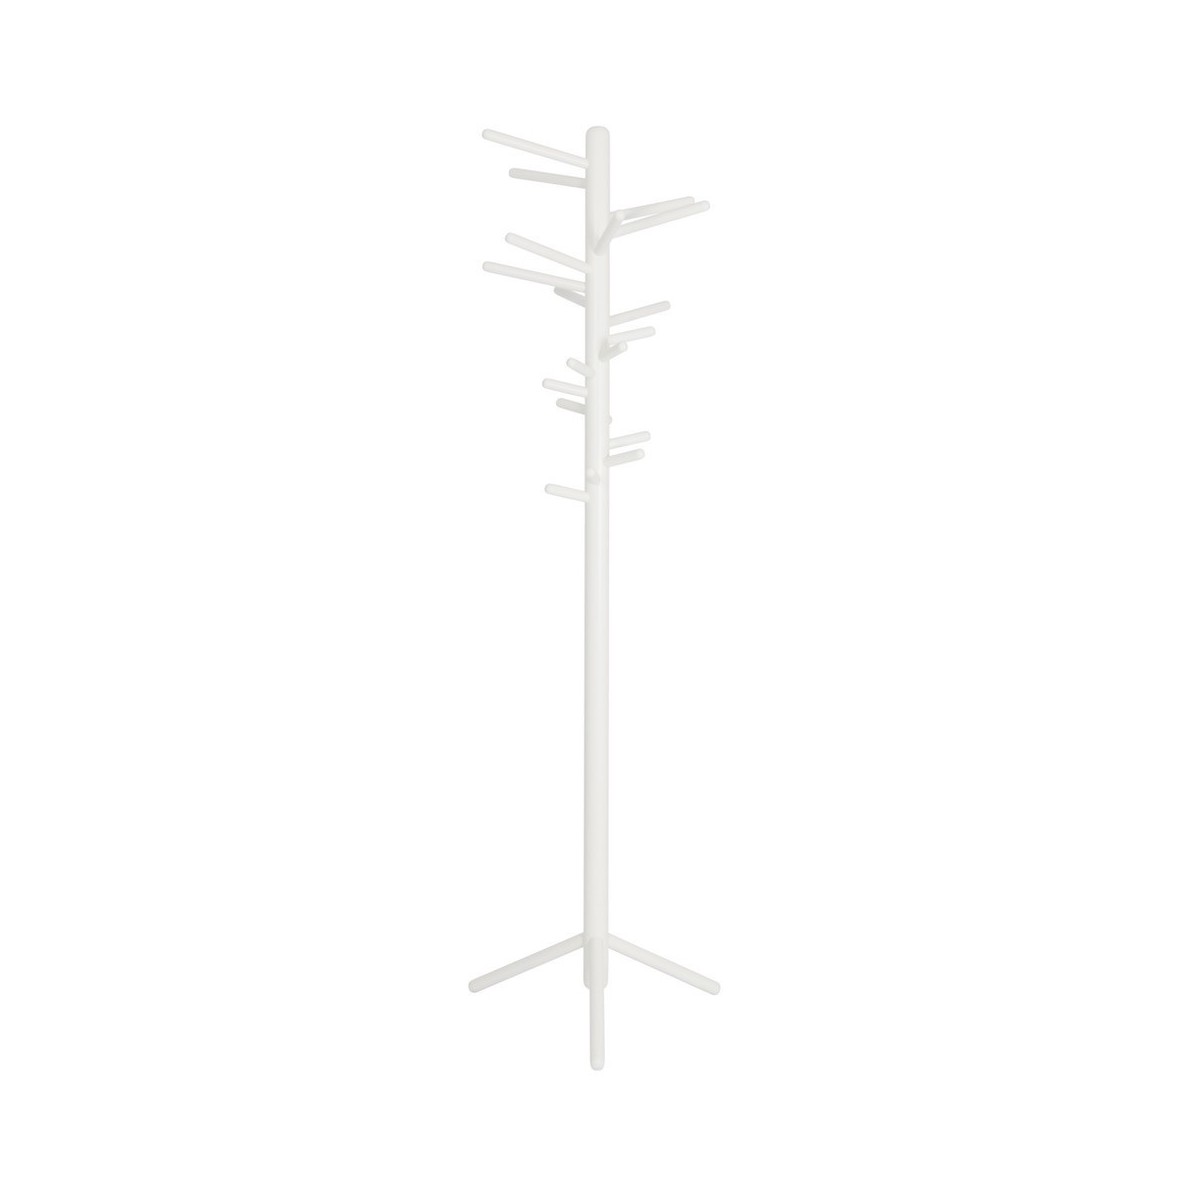 white lacquered birch + white base - 160 Clothes Tree